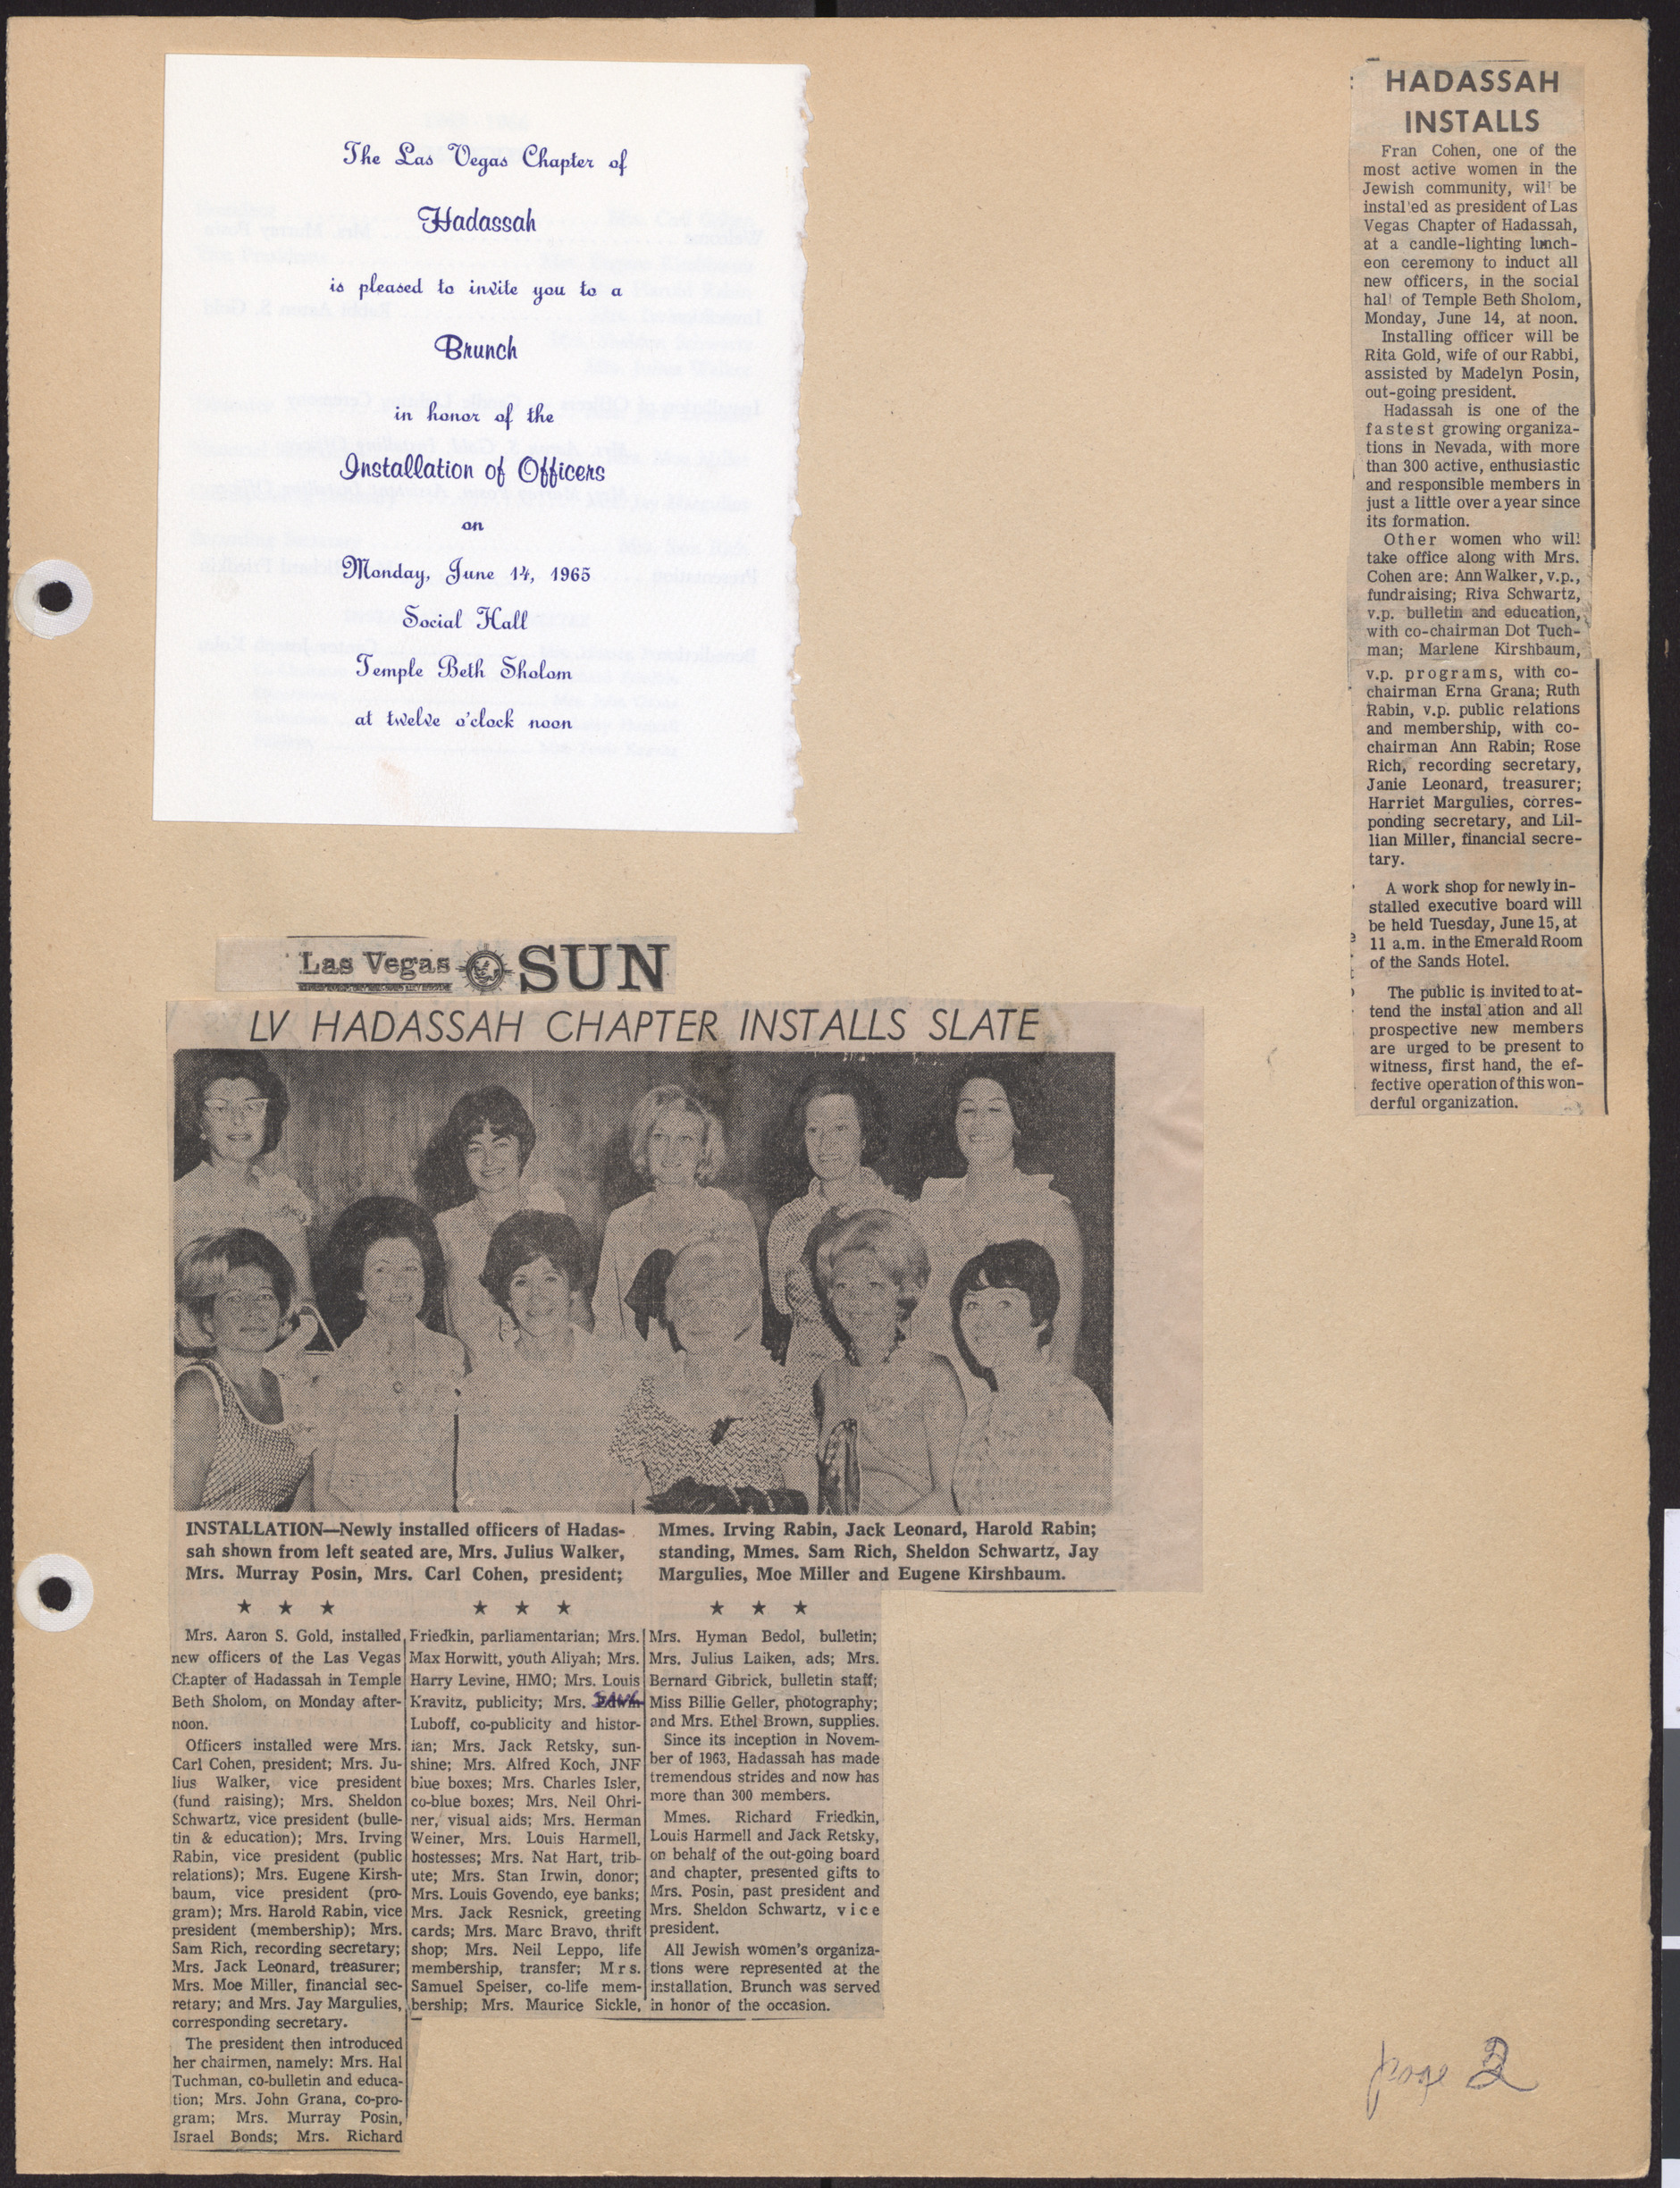 Invitation to Hadassah officers installation brunch, June 14, 1965, and newspaper clippings about the event